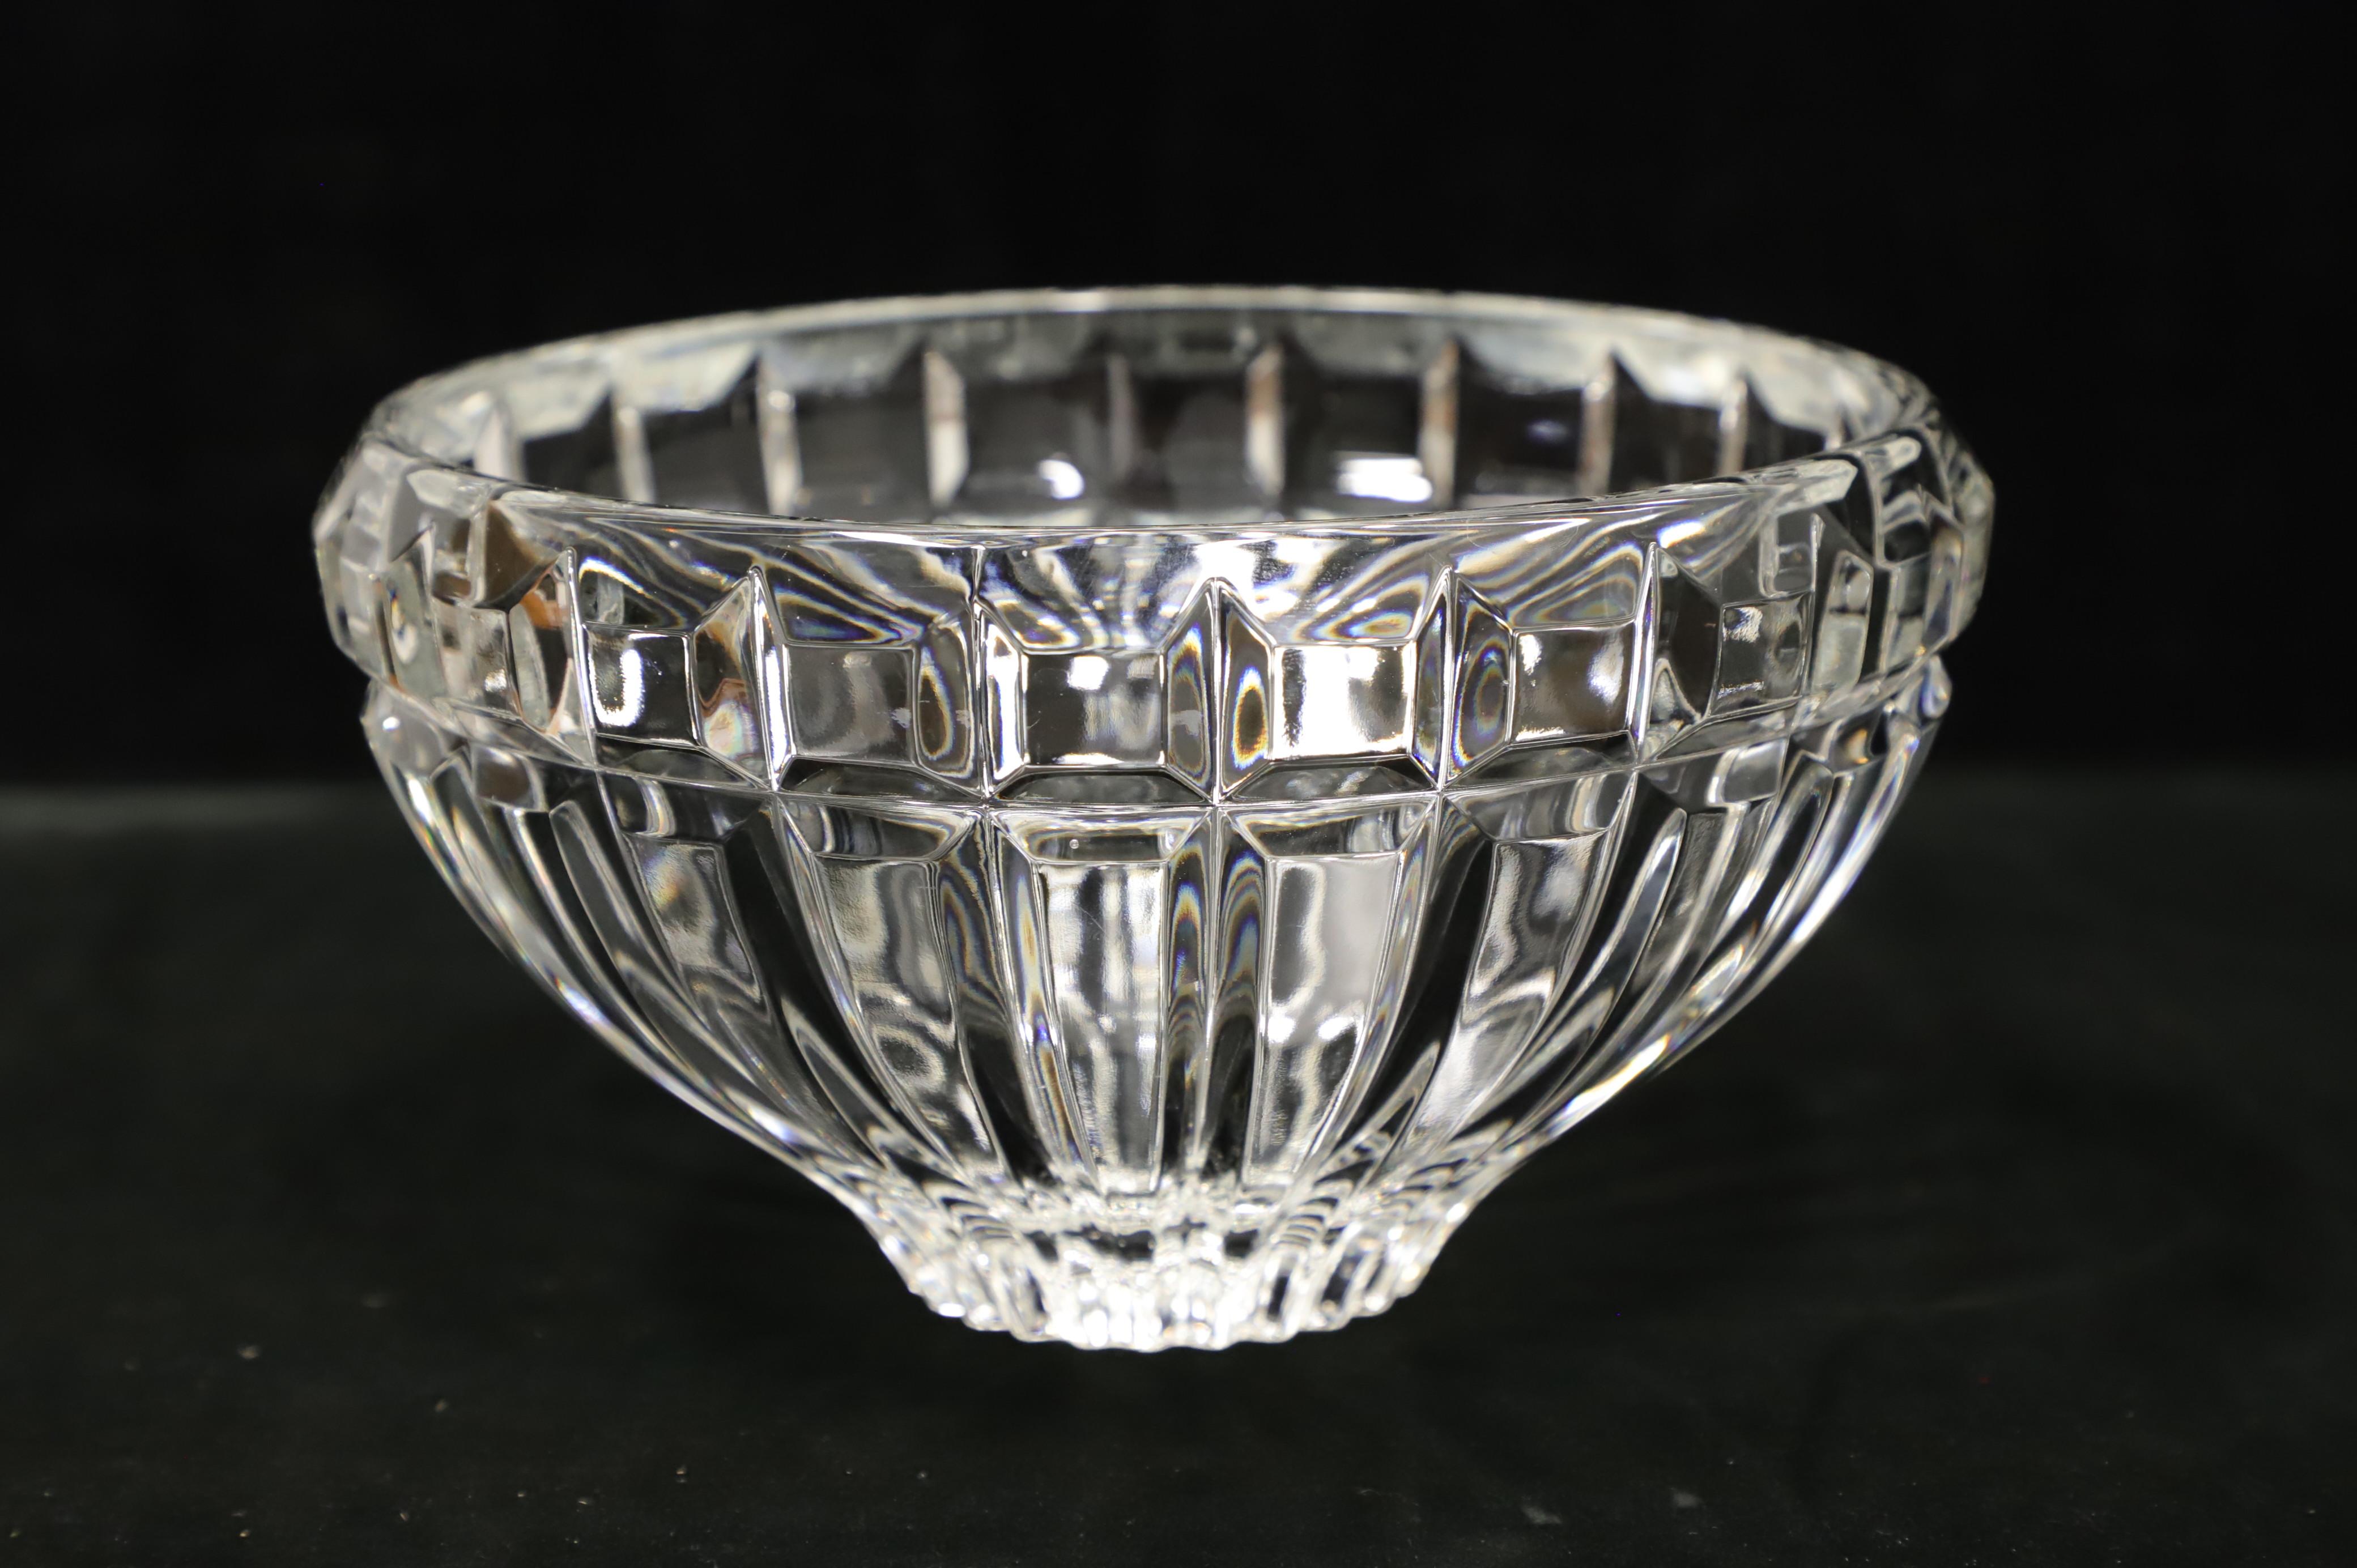 A Late 20th Century decorative crystal bowl. Clear crystal round bowl with a square cut diamond pattern at rim with square cut beneath tapering narrower to bottom. Origin unknown, most likely the USA.

Measures: 8w 8d 4.5h, Weighs Approximately: 3